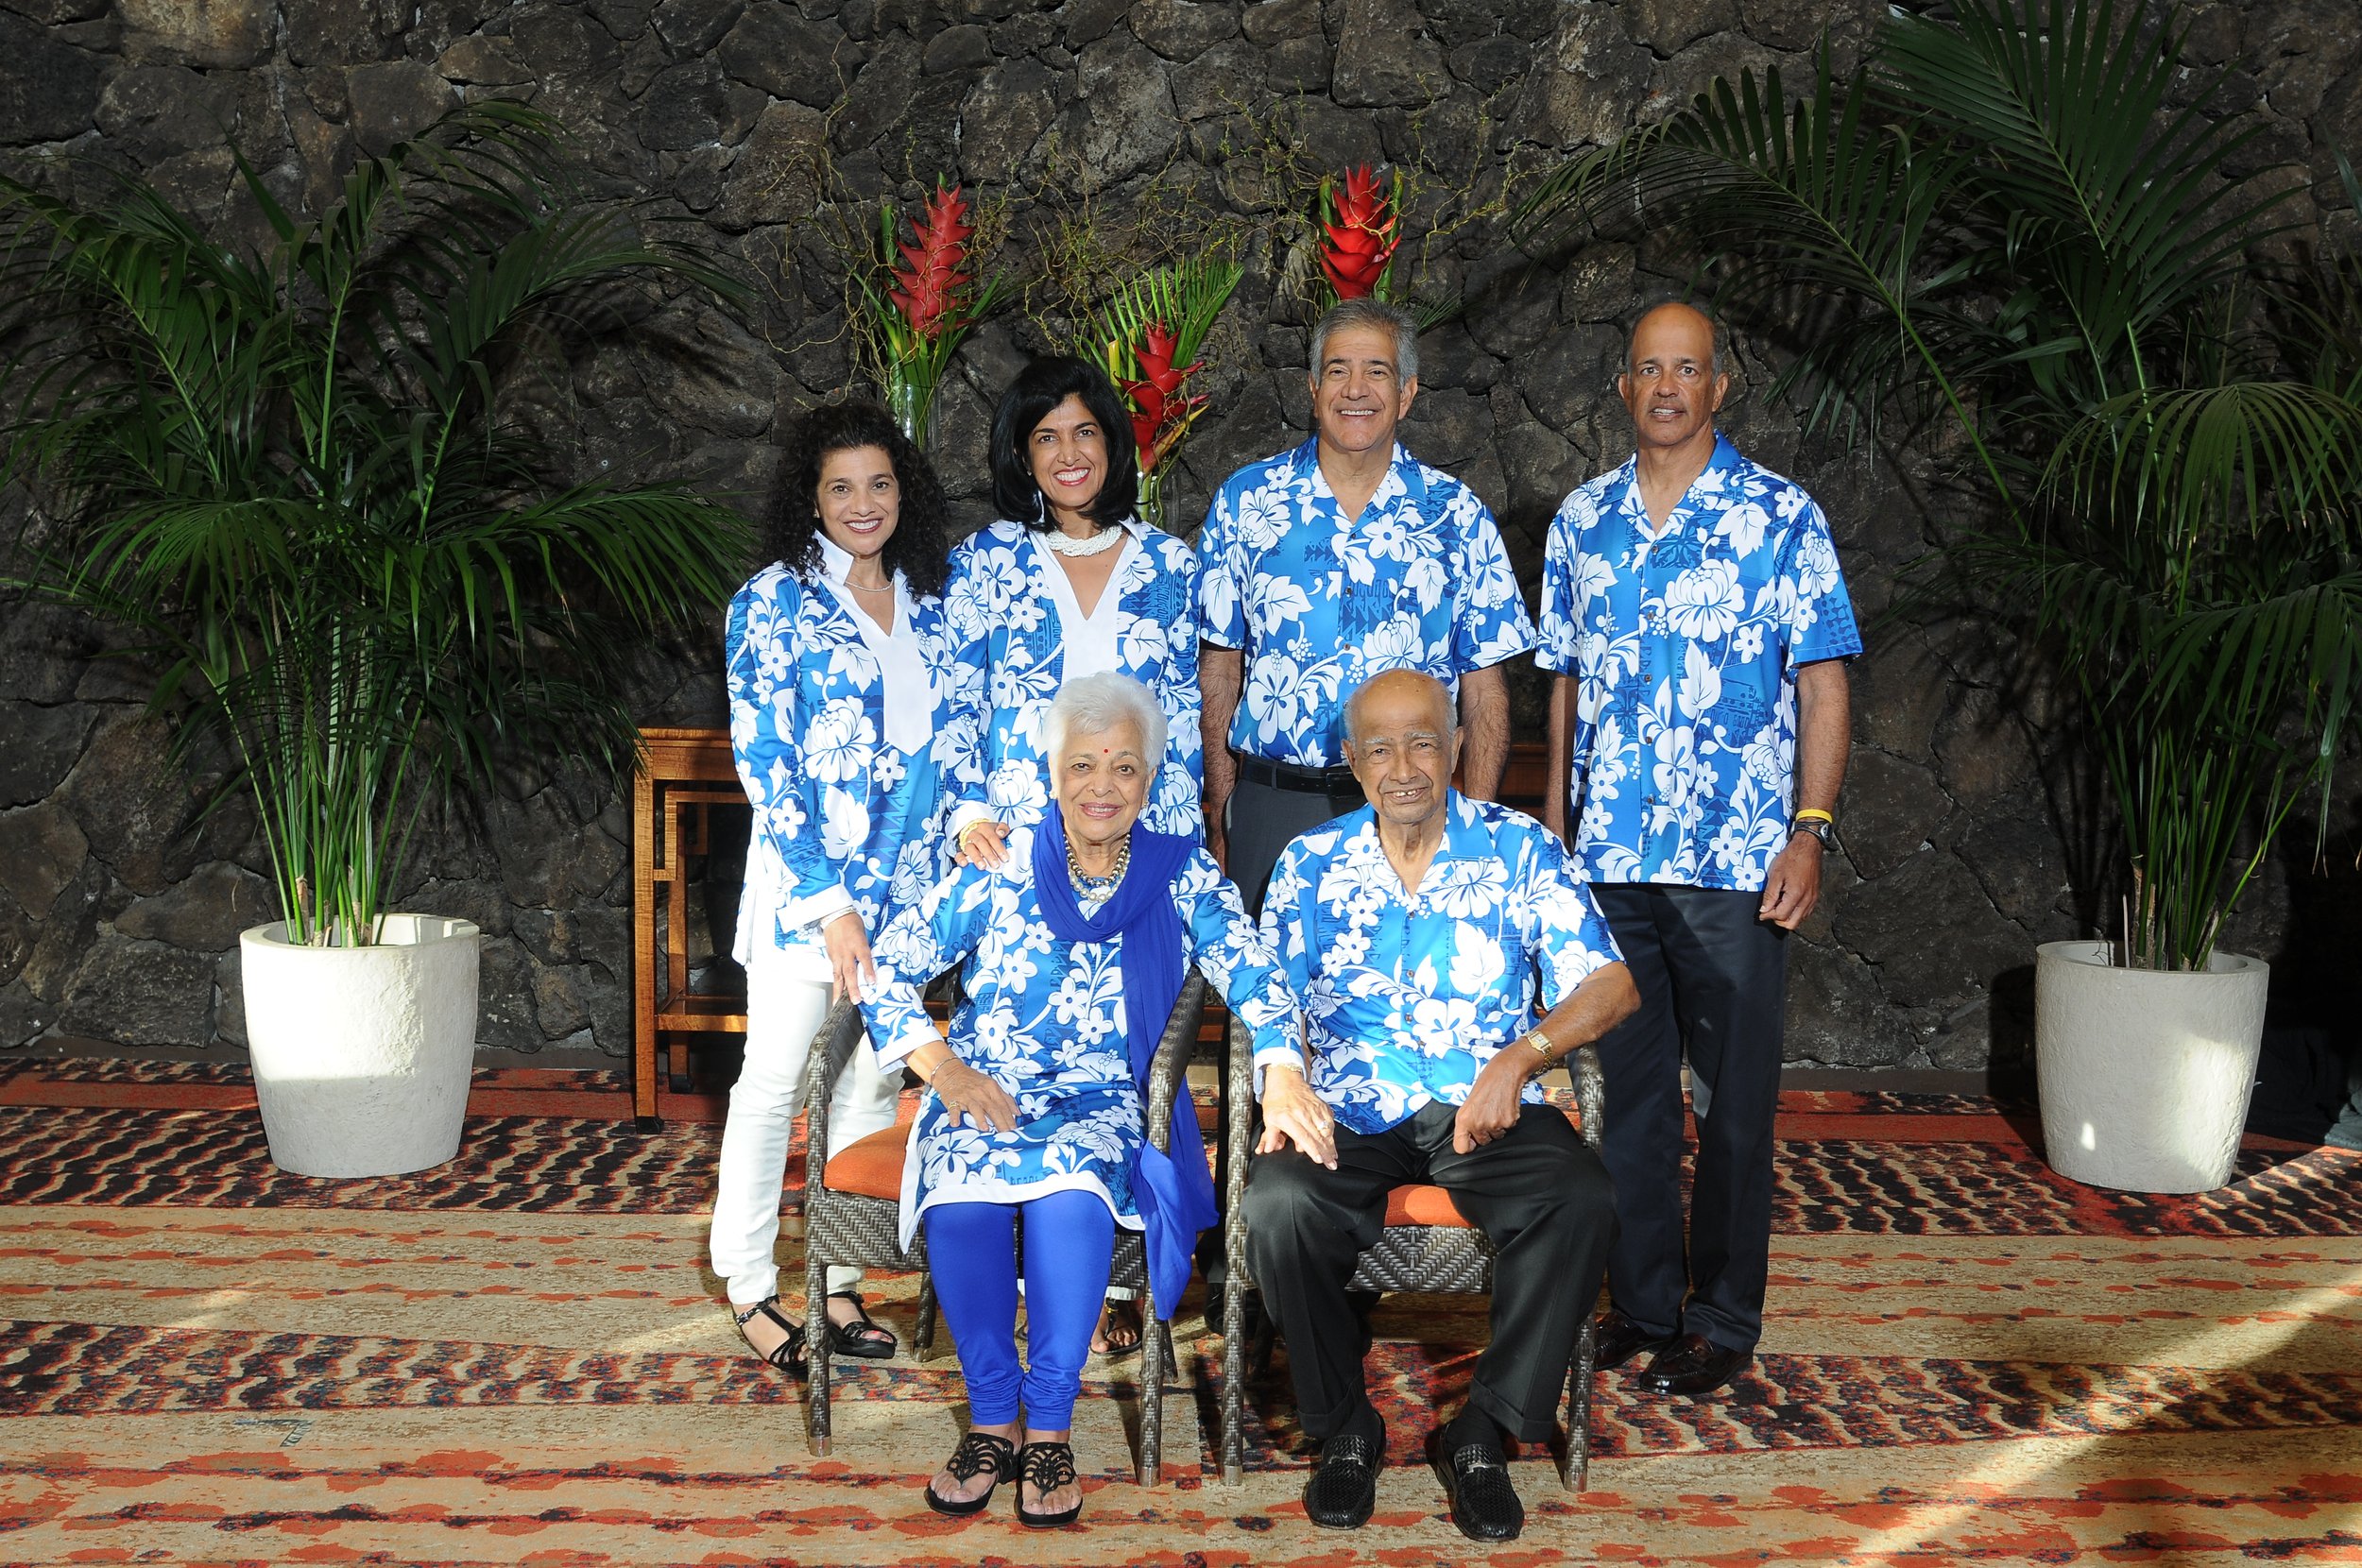  A family portrait for Watumull Bros. 100th Anniversary. The family is seen wearing a recreation of one of their Hawaiian prints.  